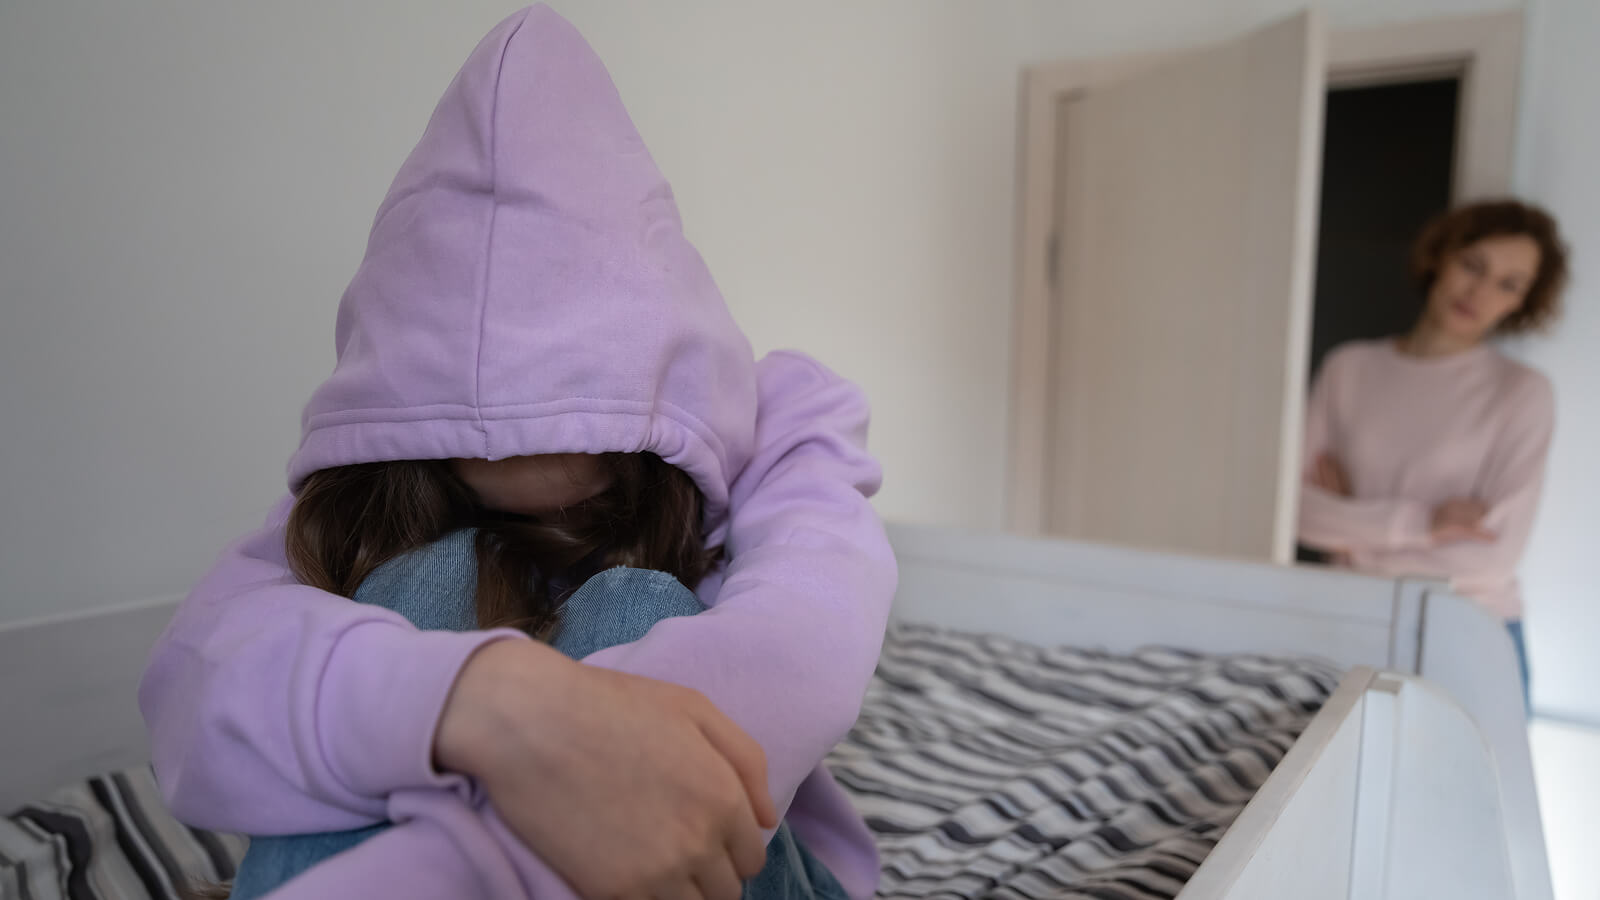 Image of a young girl sitting on her bed with a hood covering her face with her mom looking in the doorway. Learn how anxiety in teens can affective their mental health and find support with teen counseling in Macon, GA.